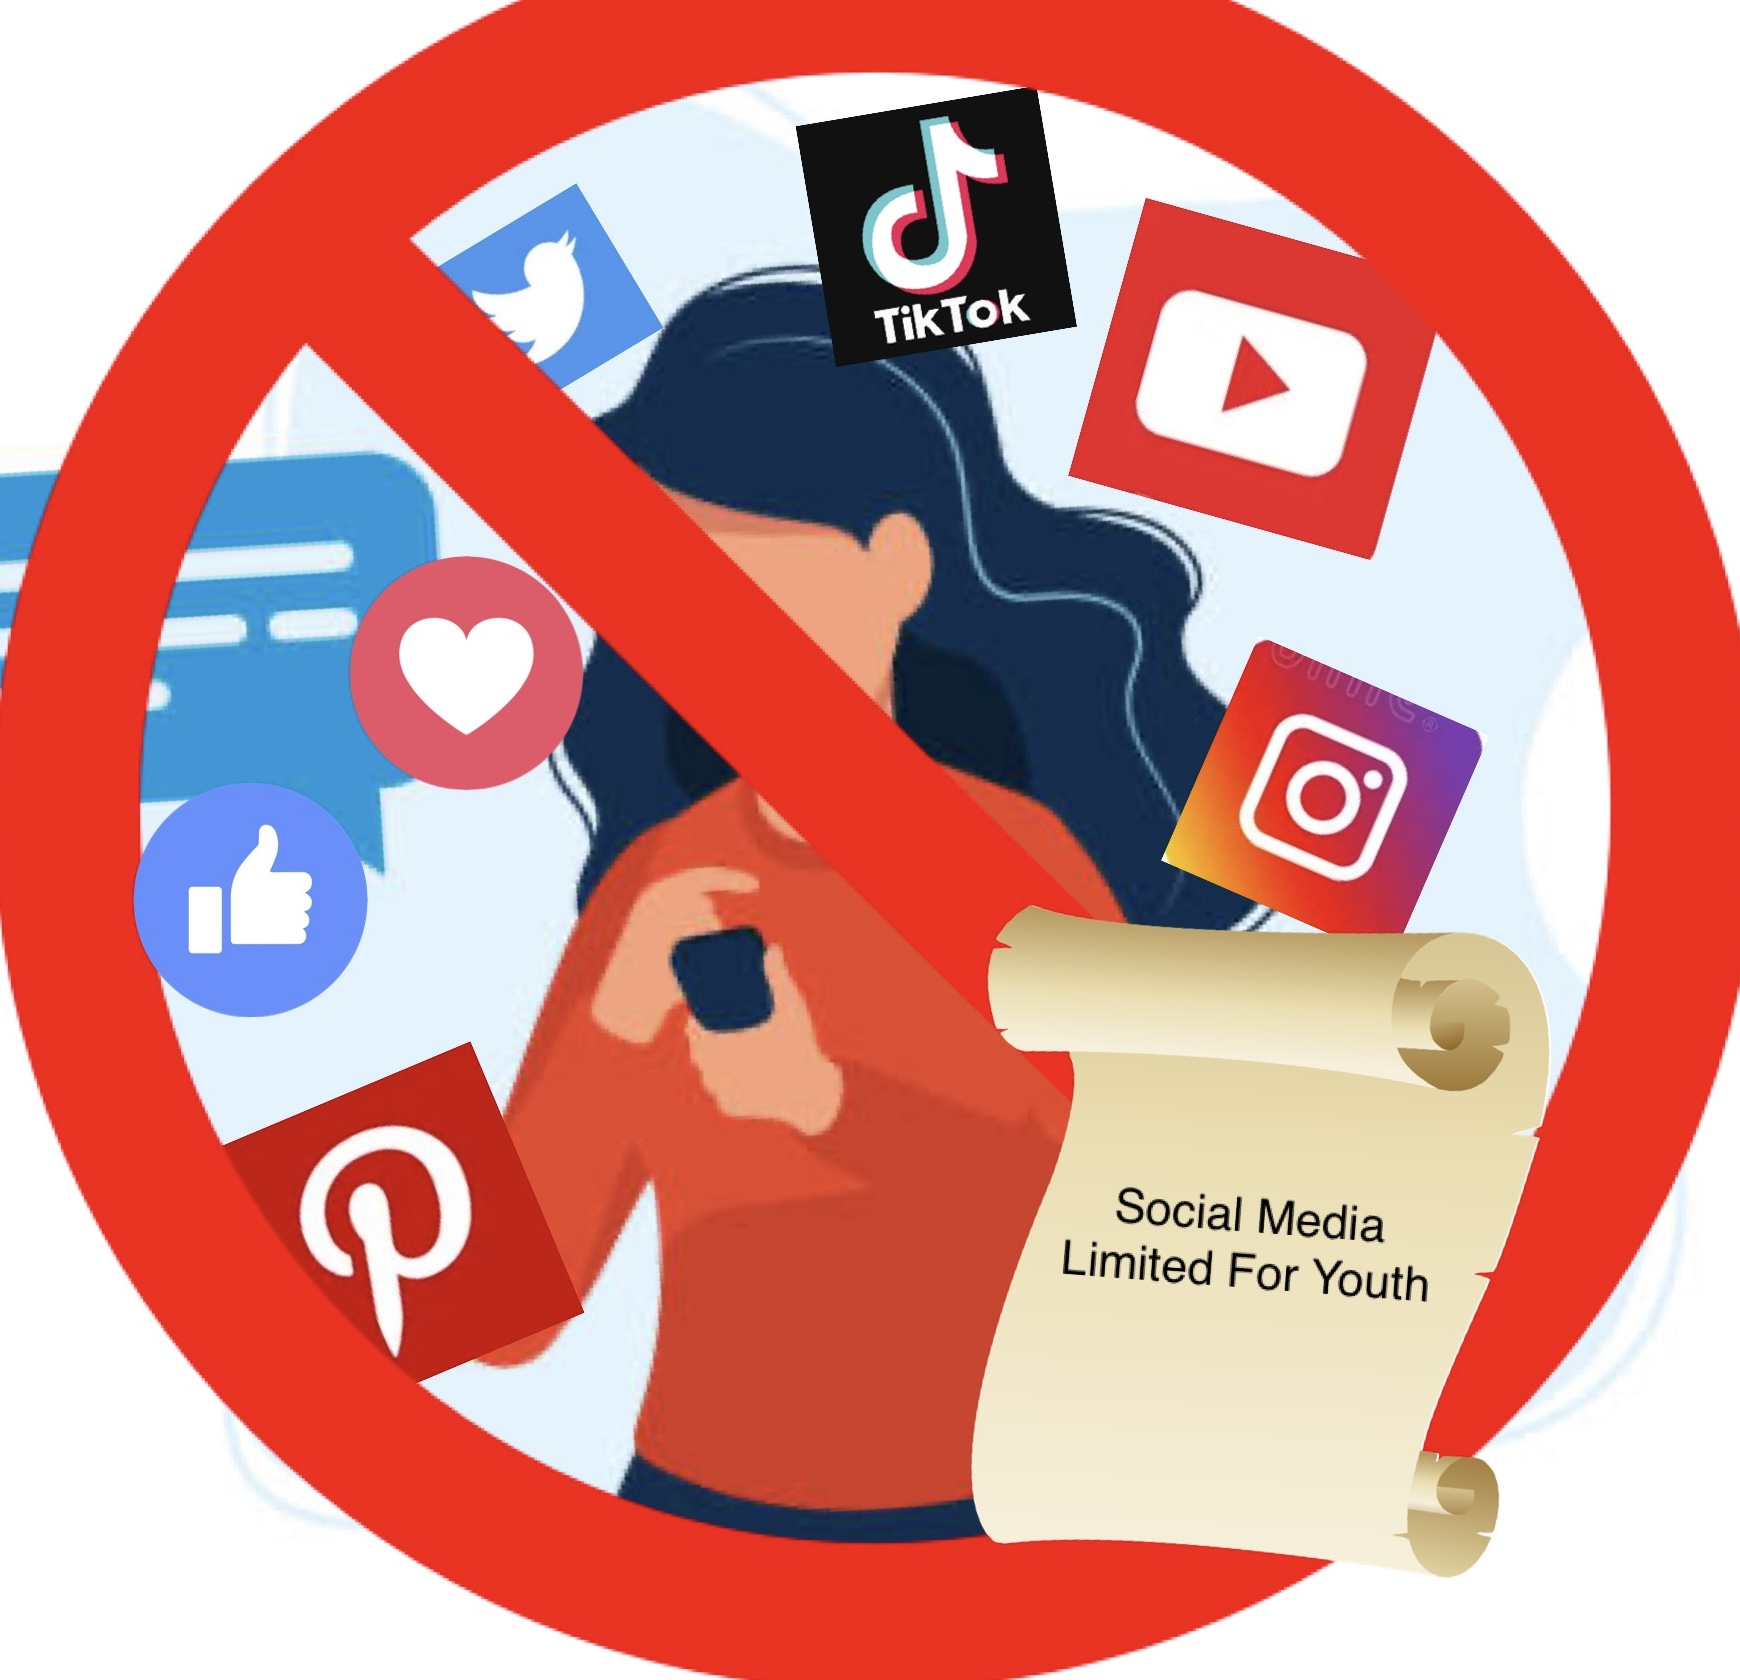 Newly proposed California Senate bill hopes to reduce harmful algorithms social media contains. This bill is set to have social media companies put limits on users under 18 to make sure children are protected from the negative effects. 